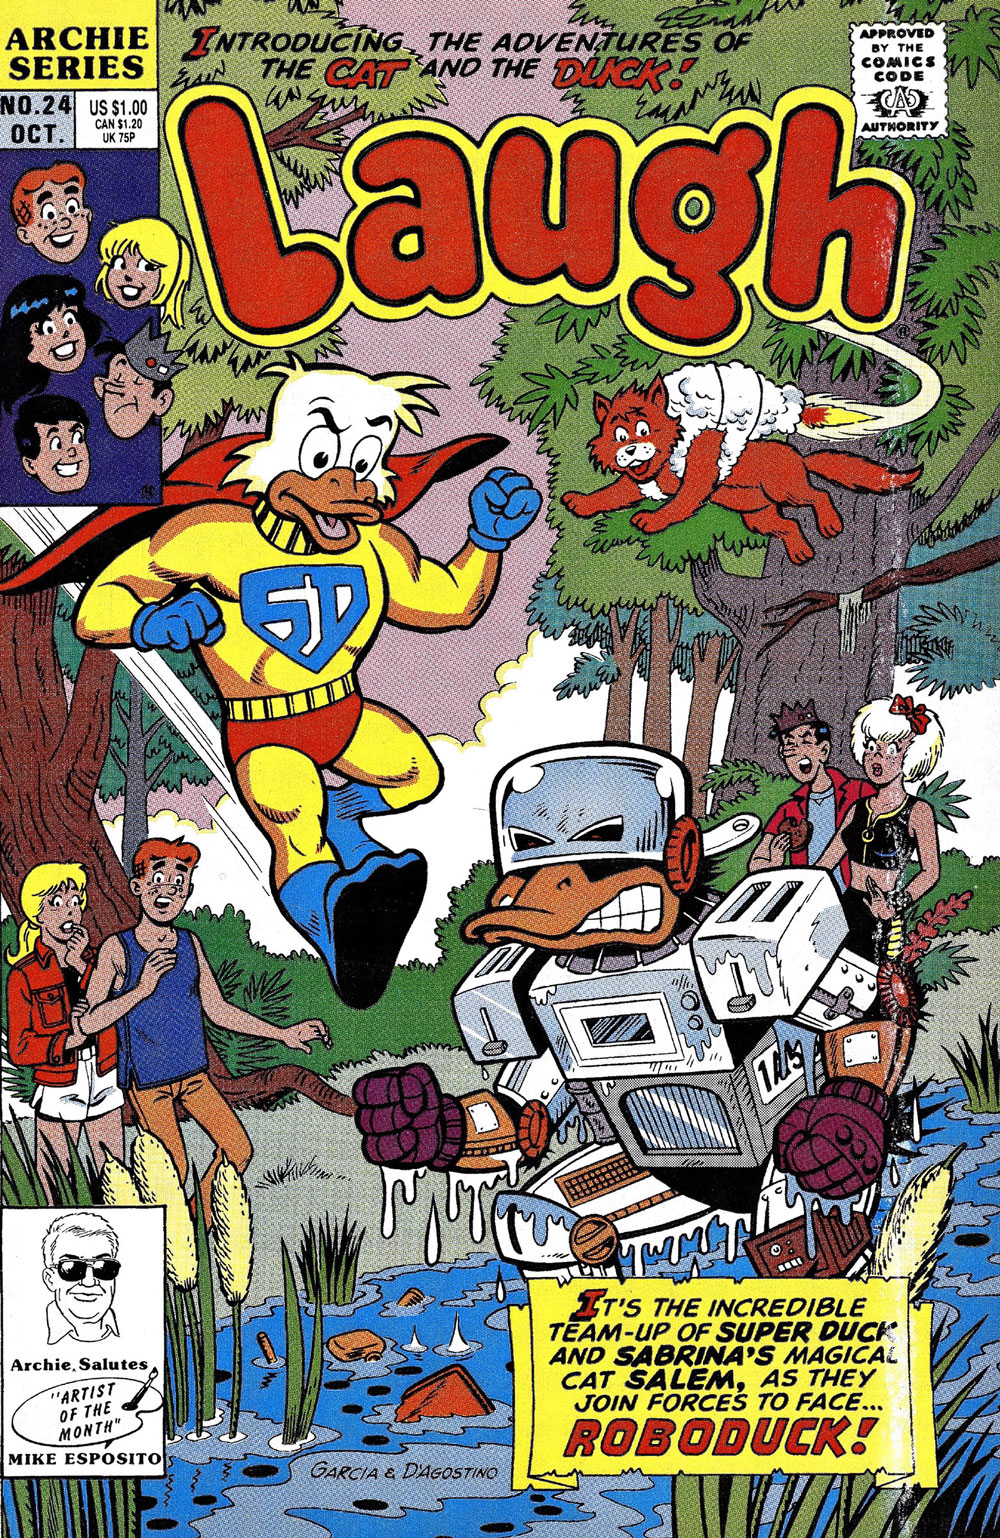 Super Duck and Salem the cat are flying into a scene in the woods where a villain called Roboduck is emerging from a river with a scowl. Betty, Archie, Jughead, and Sabrina look on alarmed.